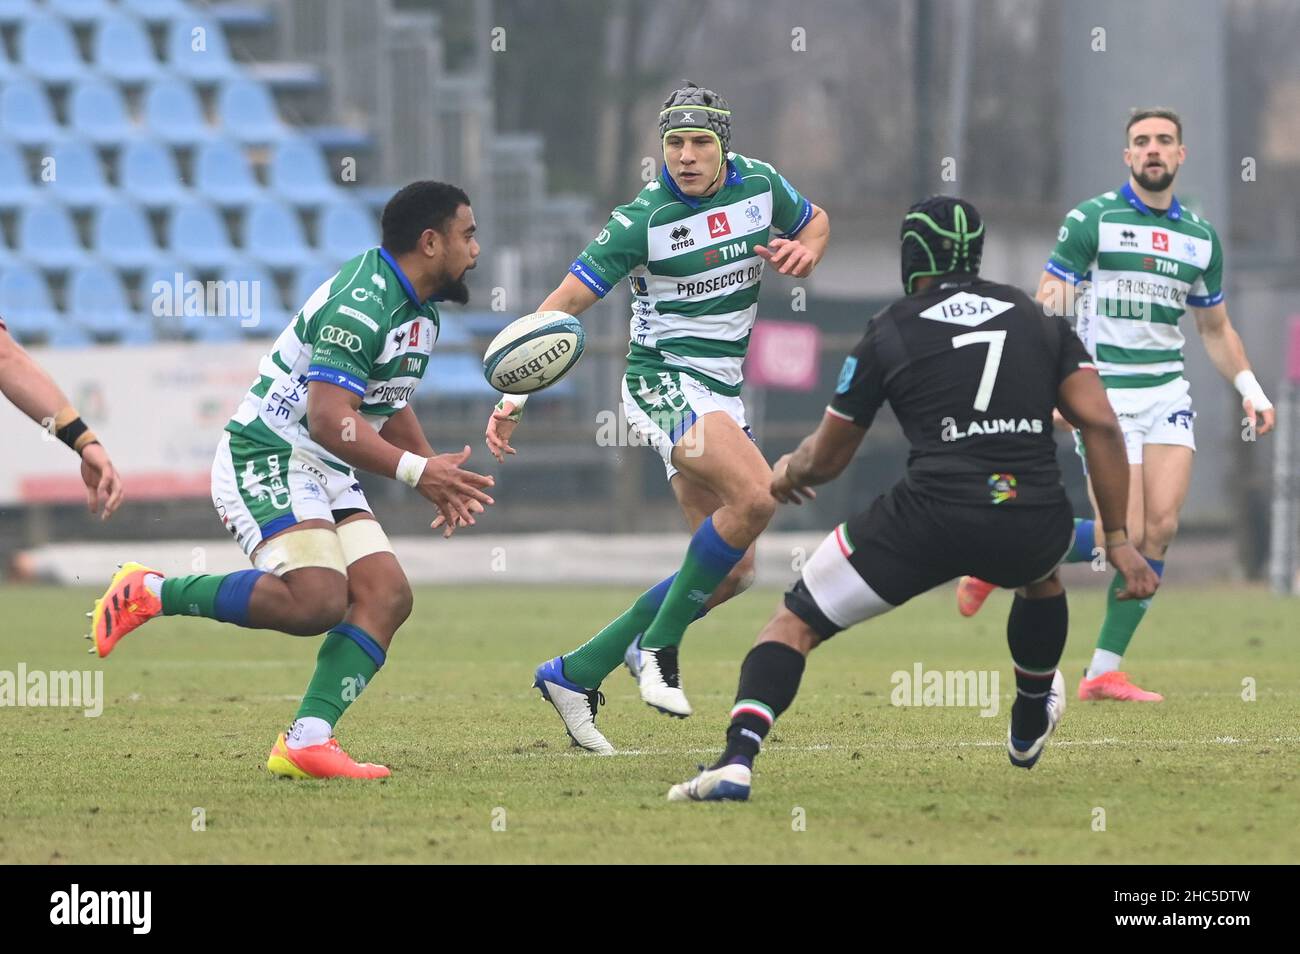 Parma, Italy. 24th Dec, 2021. Monty Ioane and Ignacio Brex (Benetton) during Zebre Rugby Club vs Benetton Rugby, United Rugby Championship match in Parma, Italy, December 24 2021 Credit: Independent Photo Agency/Alamy Live News Stock Photo